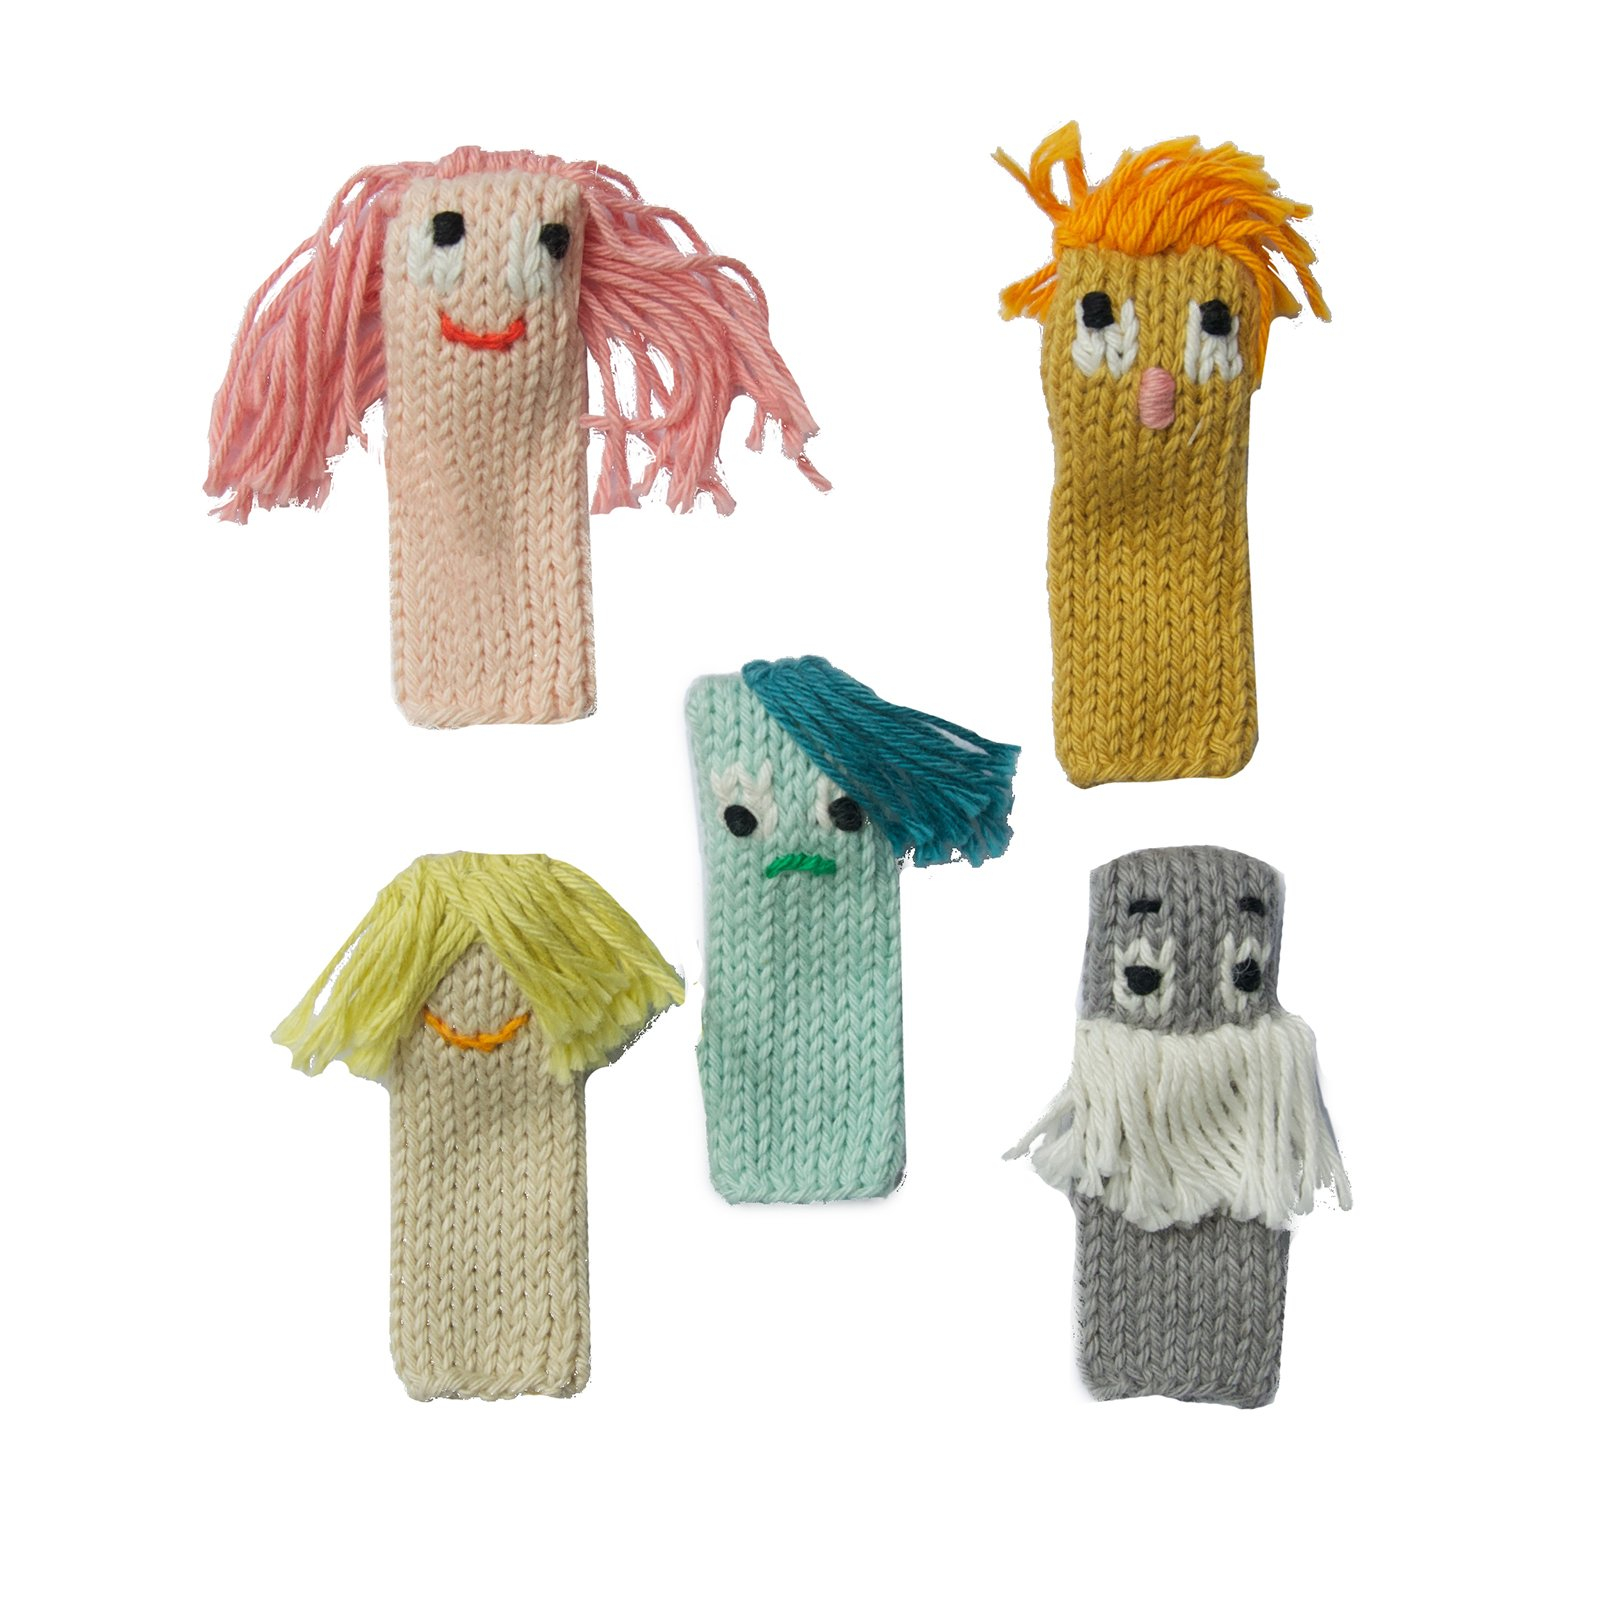 Knitting Patterns For Finger Puppets Blabla Knitted Finger Puppets Expressionists Set